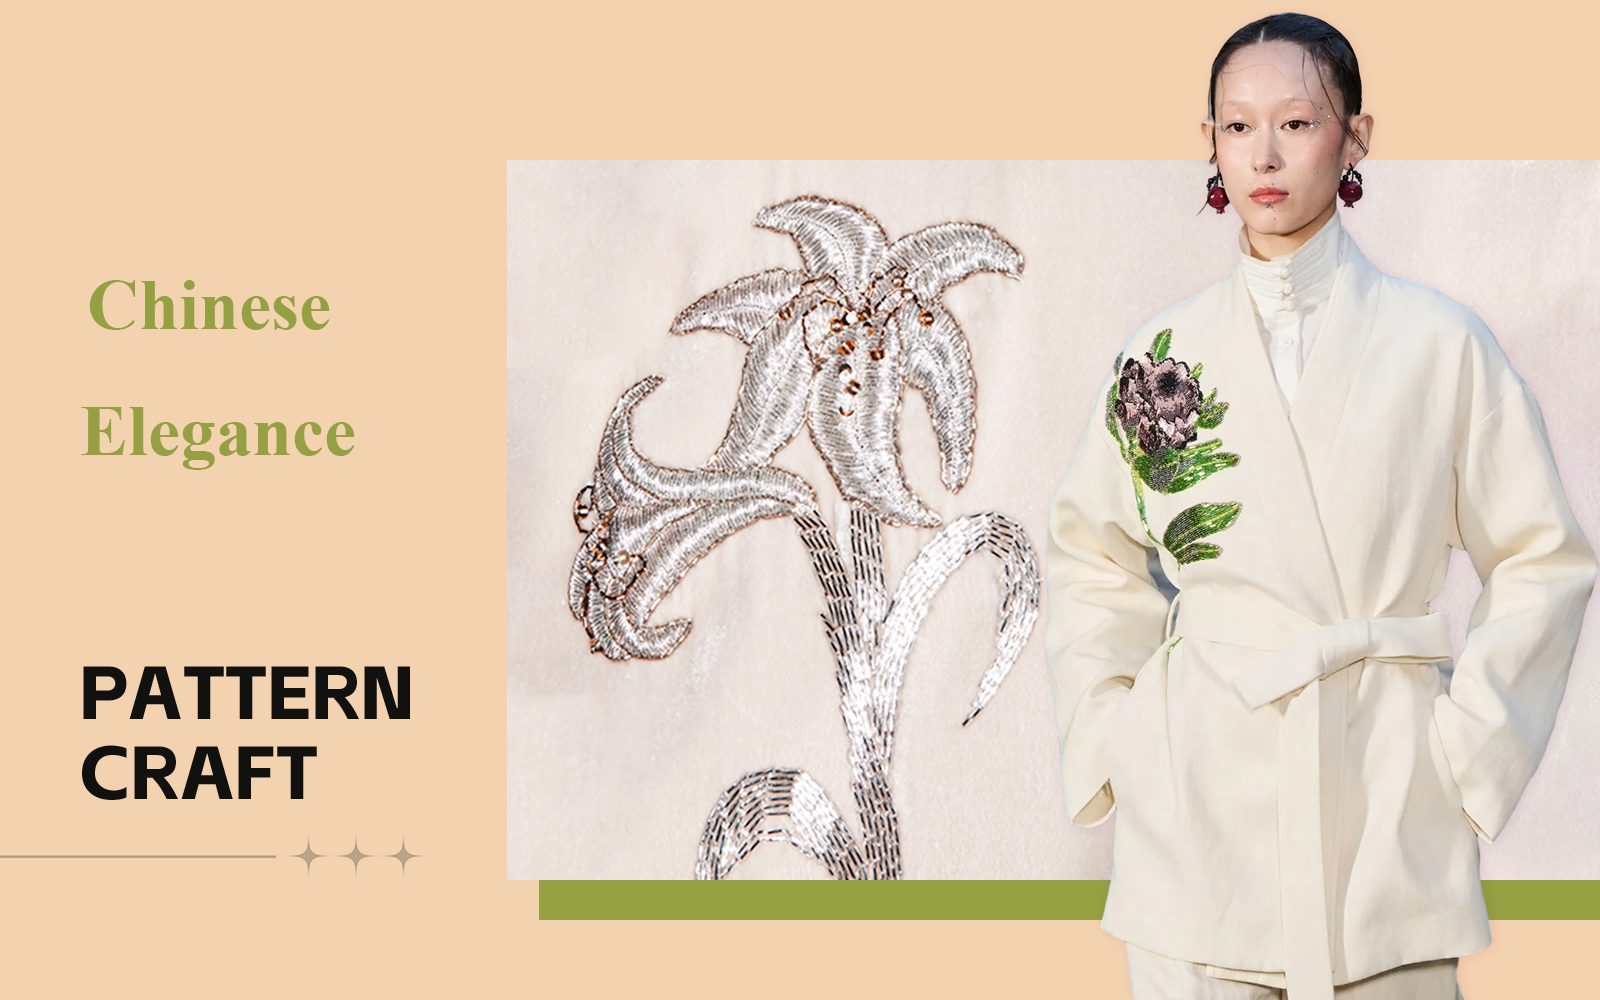 Chinese Elegance -- The Pattern Craft Trend for Embroidery